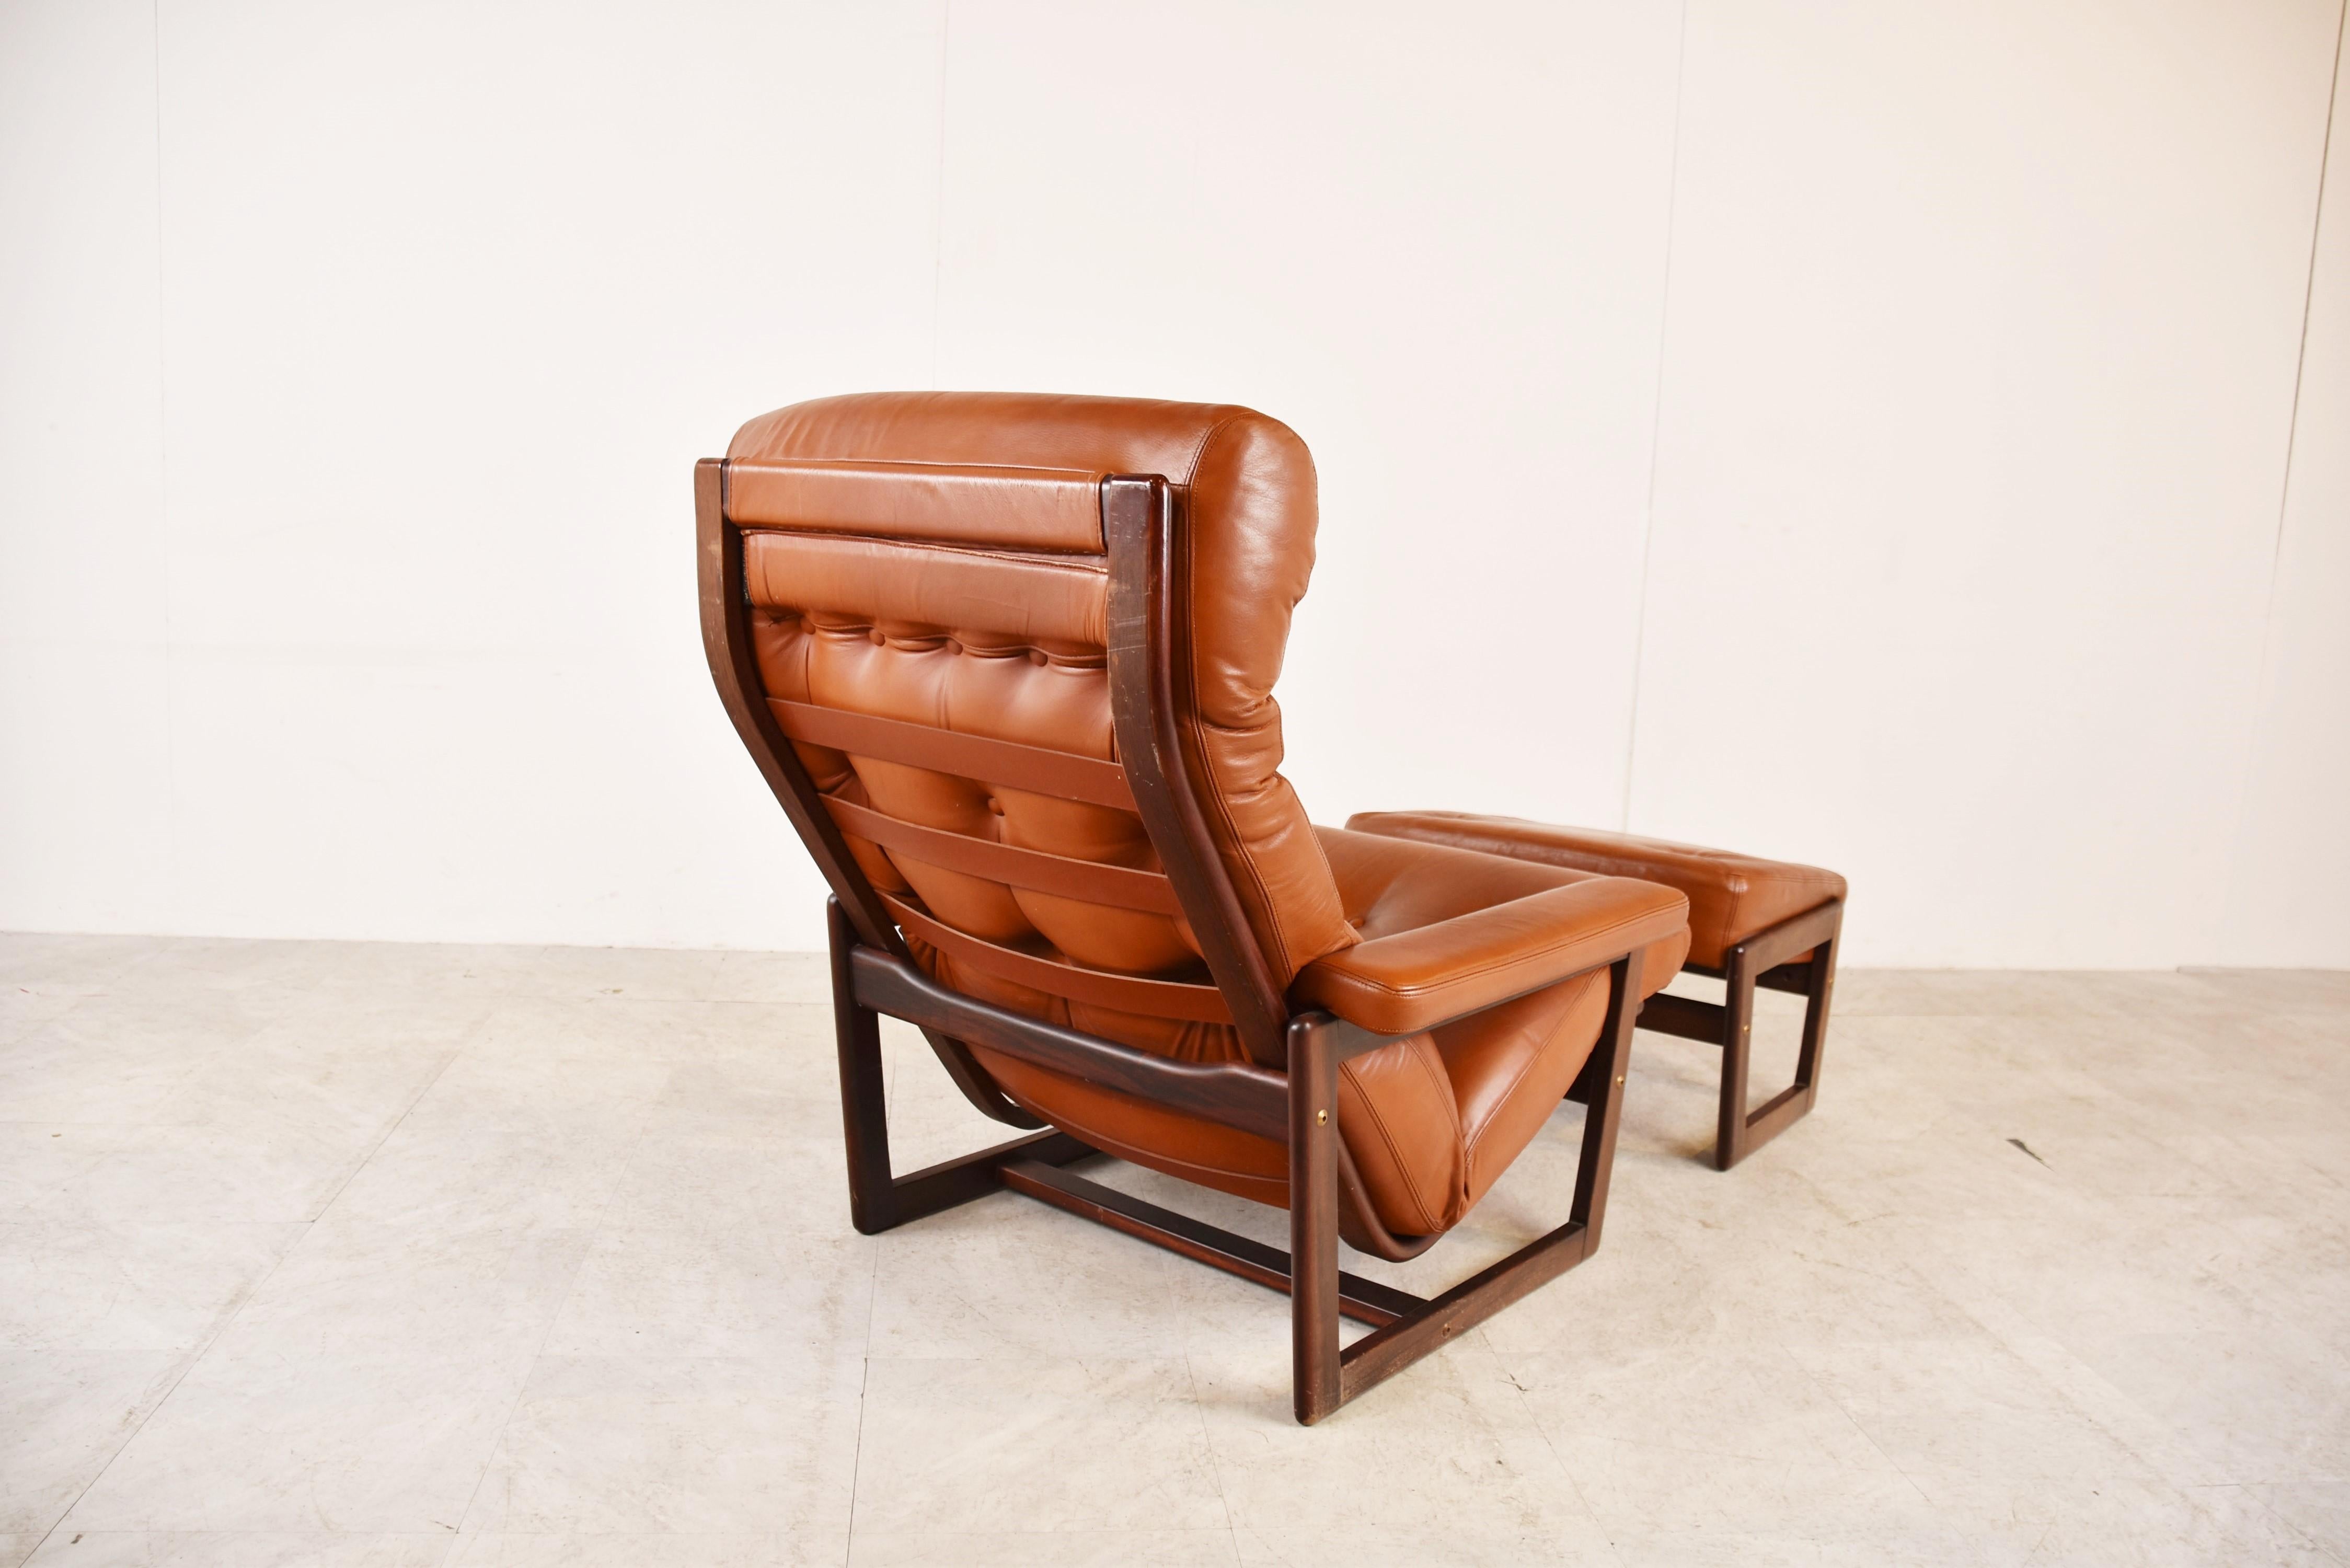 Mid-Century Modern leather armchair with hocker.

Very comfortable chair with thick leather cushions and a stained oak frame.

1960s - Germany

Good condition

Dimensions:
Height: 90cm/35.43